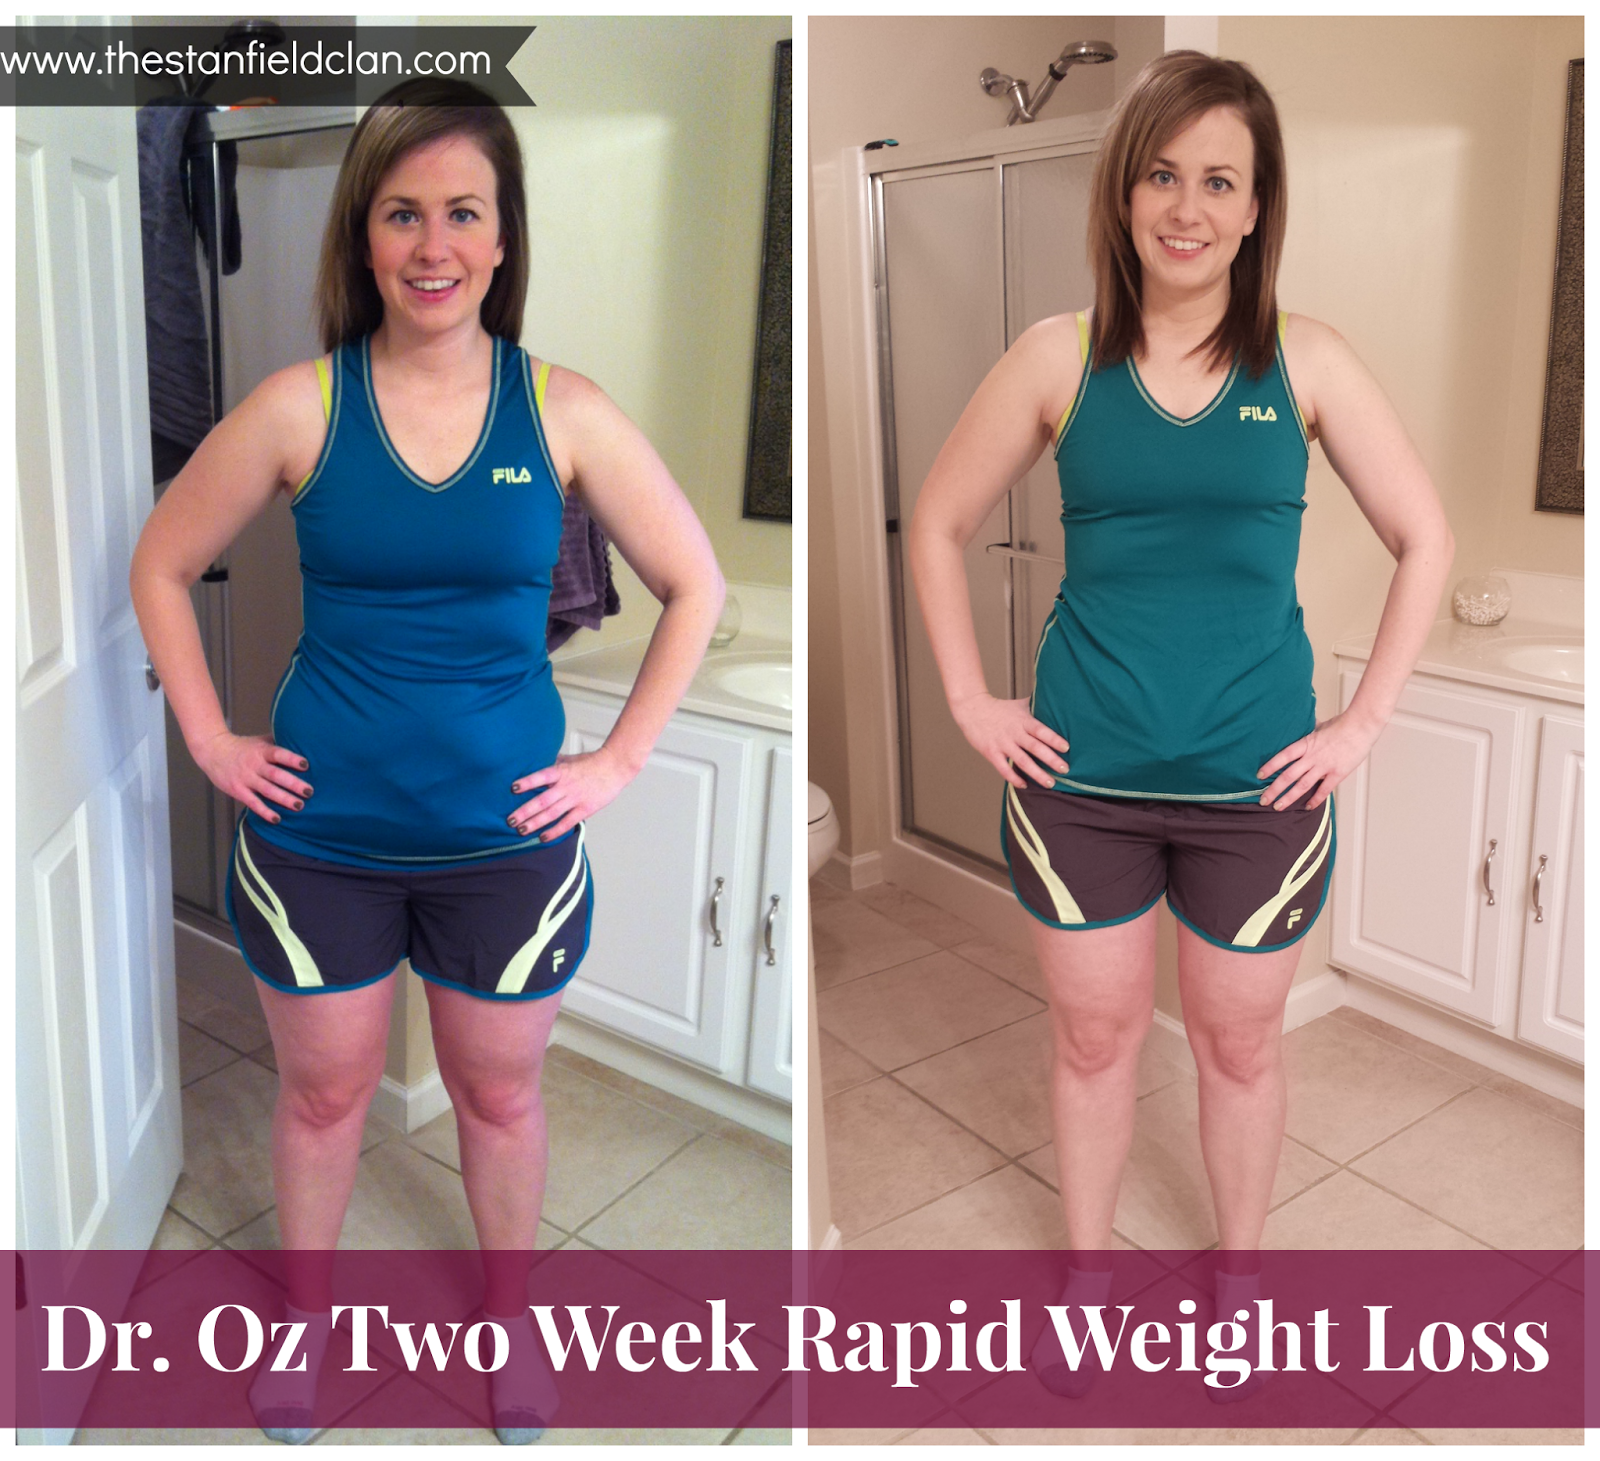 Dr. Oz's Two Week Rapid Weight Loss Challenge: Before and After Images ...